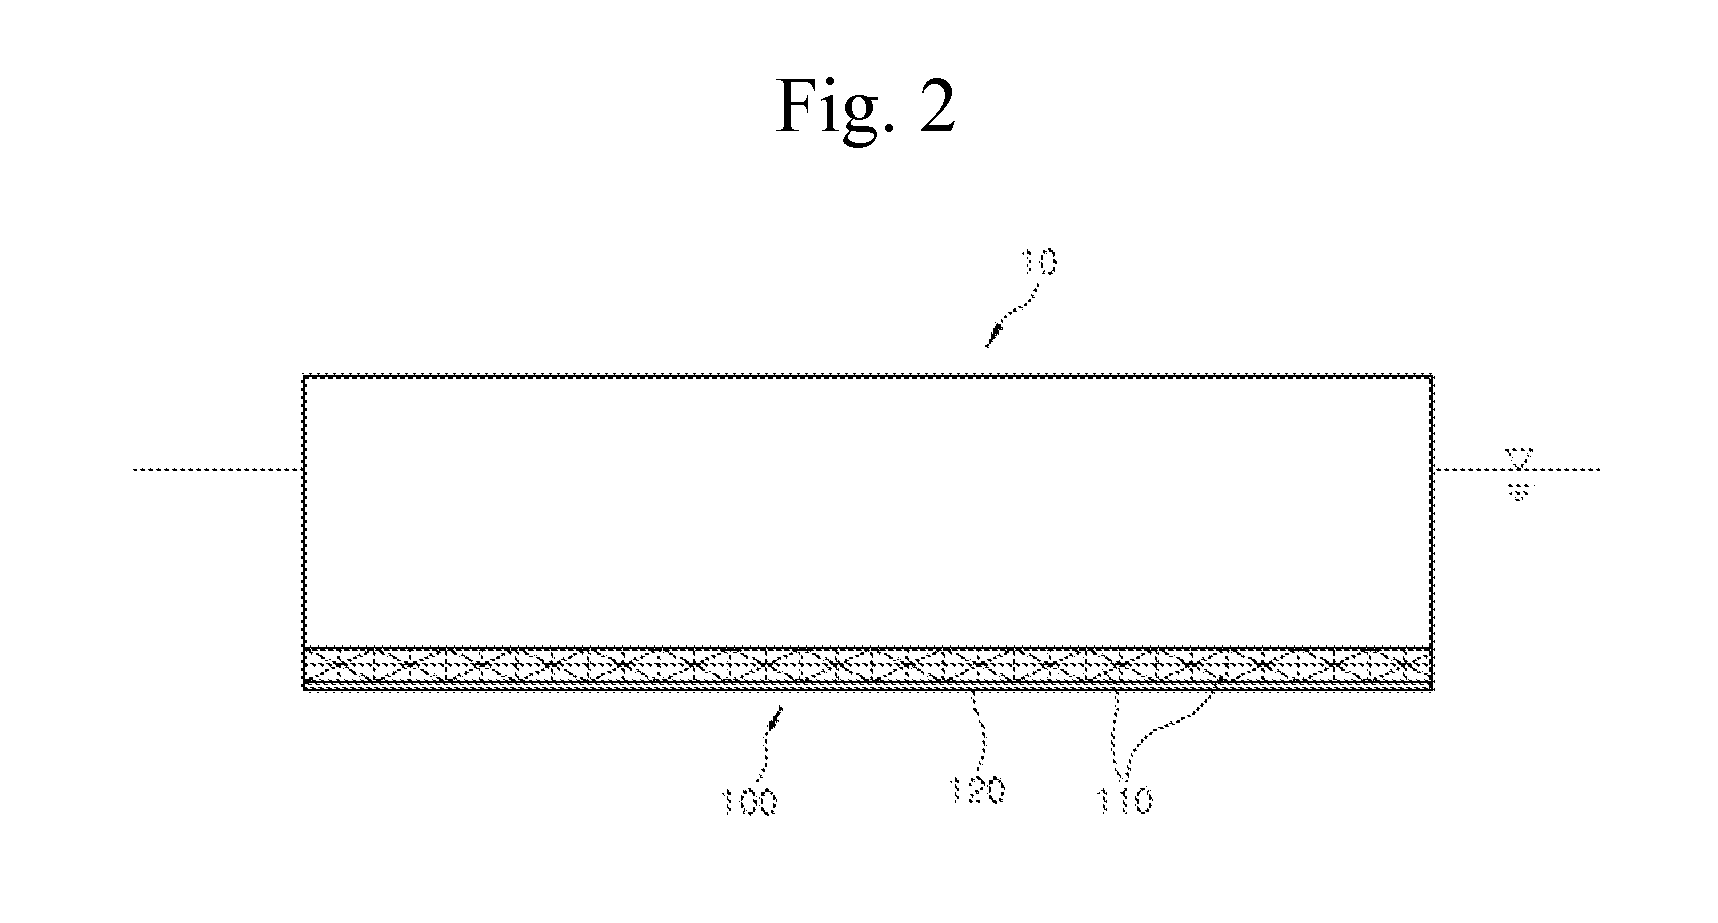 Roll suppression device for offshore structure